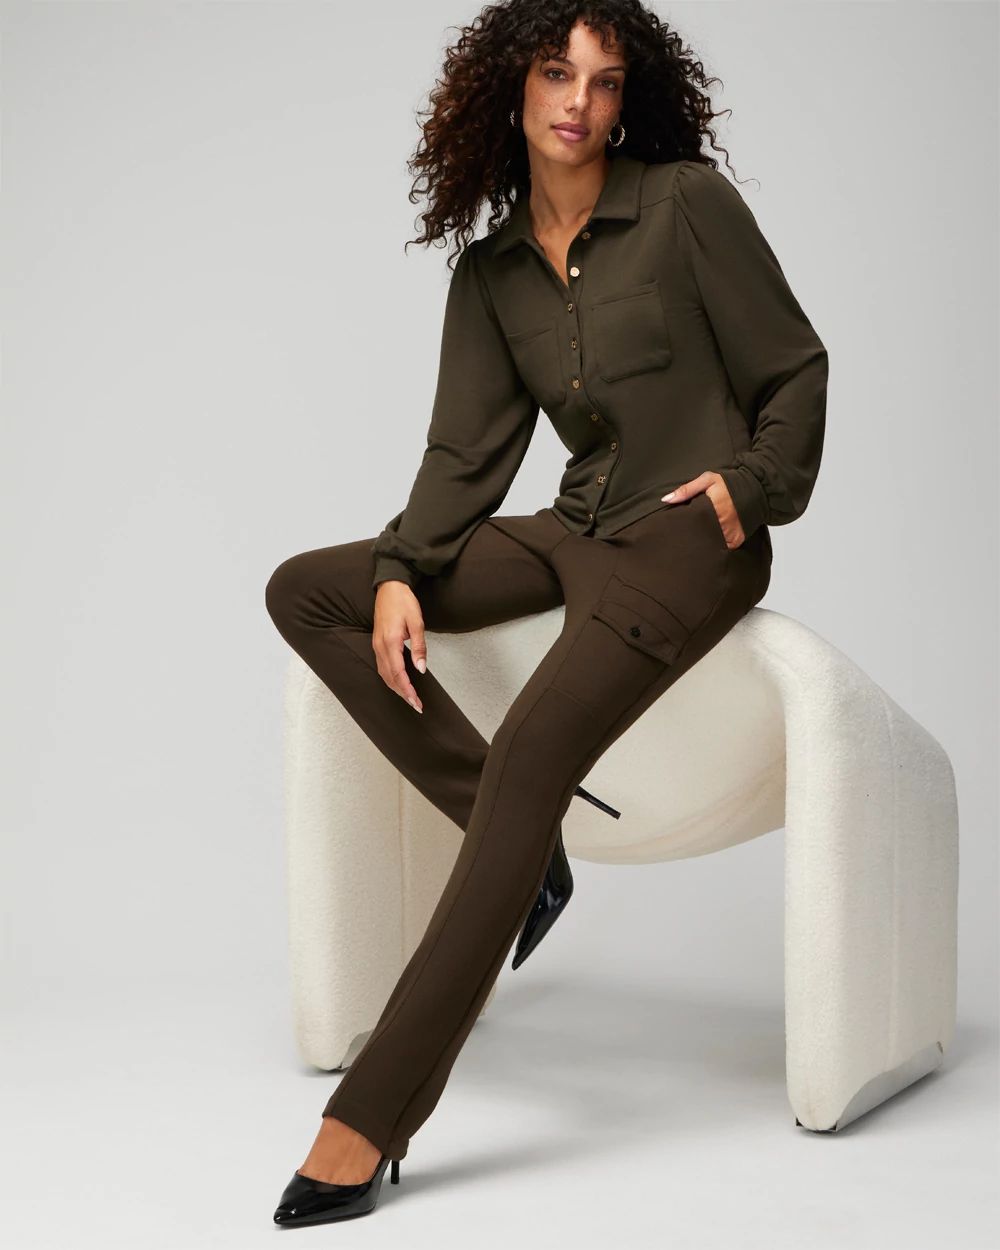 The Passporter   Utility Straight Leg Pants click to view larger image.